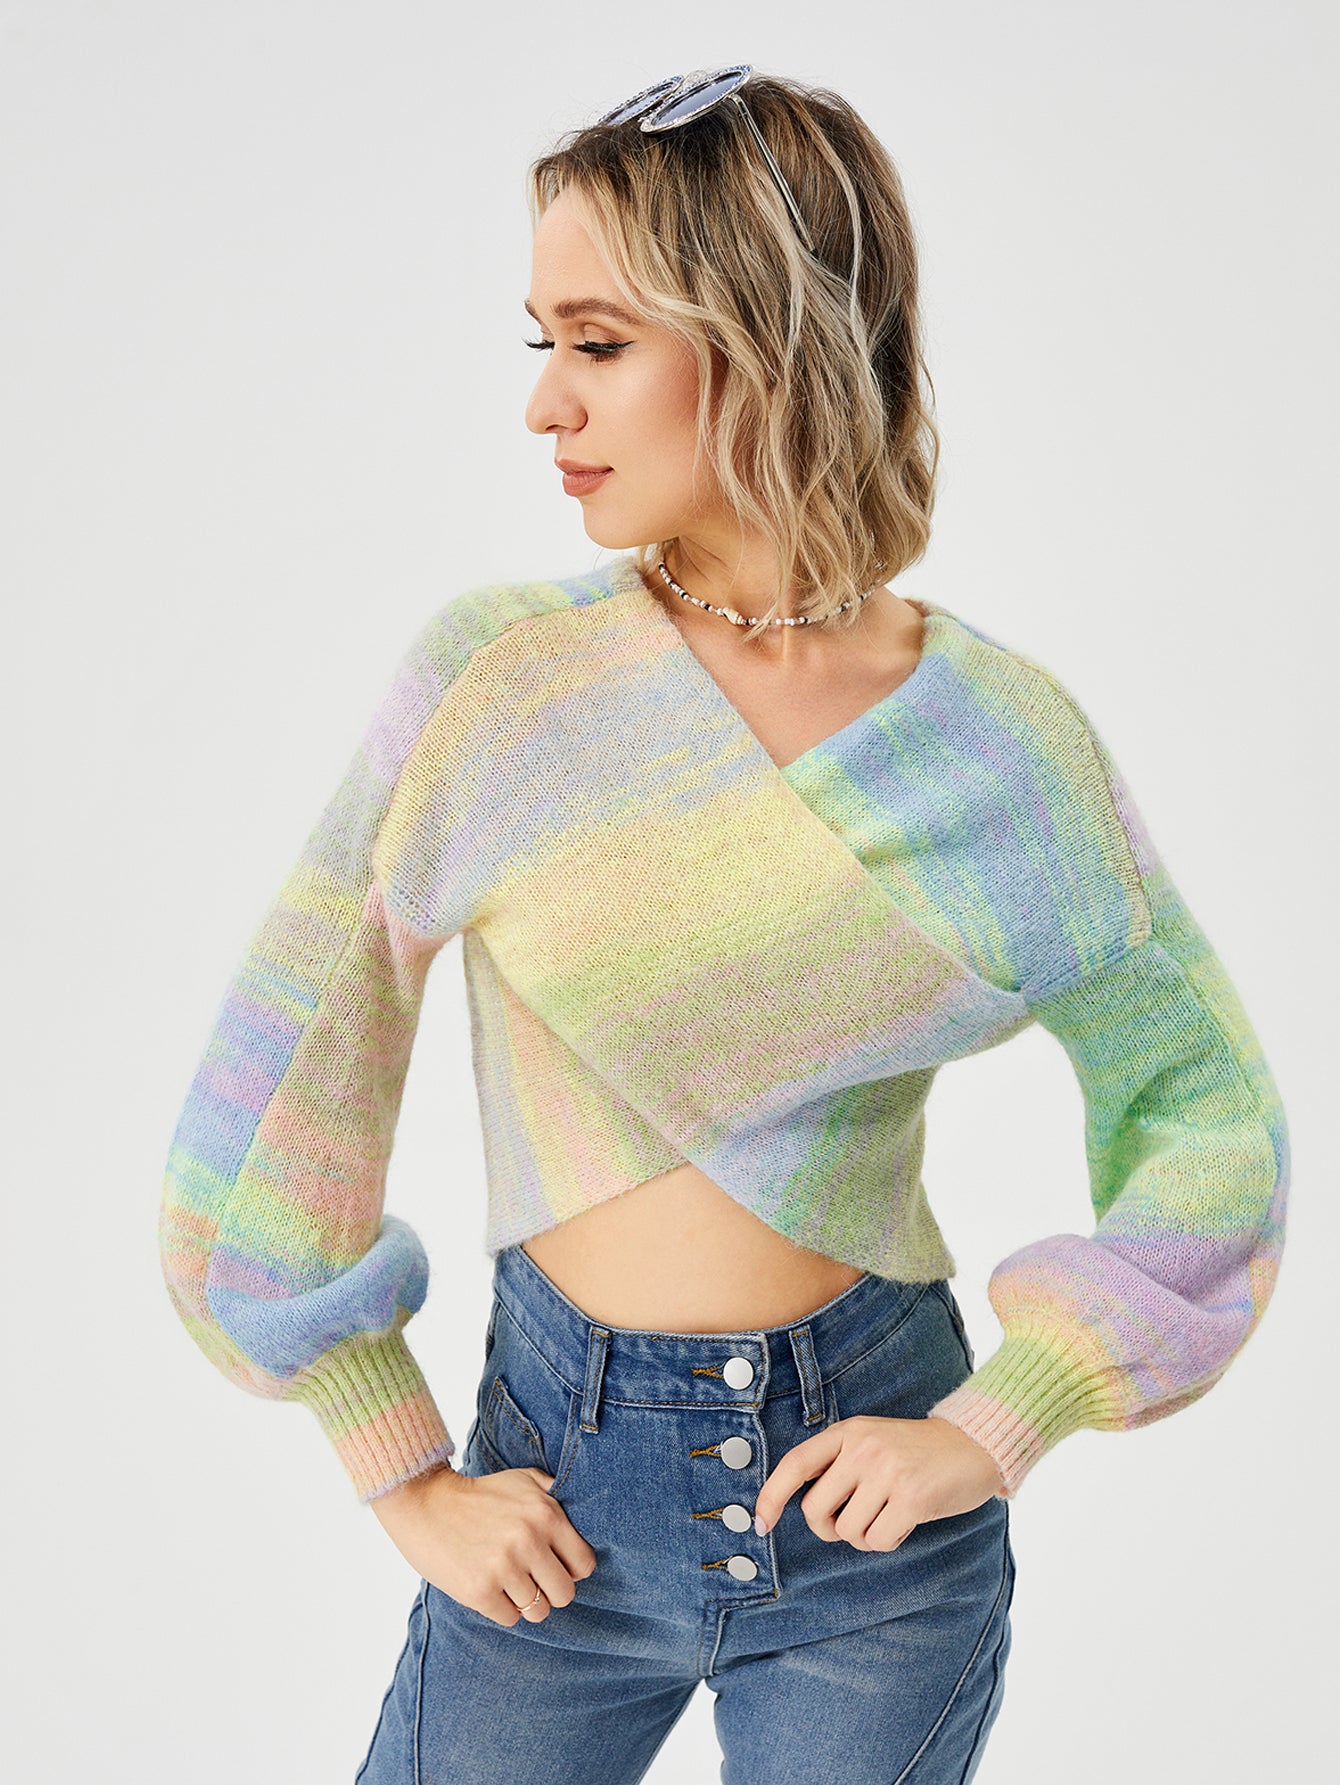 Embrace Vibrancy: Women's Loose Casual Rainbow Stretch Off-Shoulder Sweater